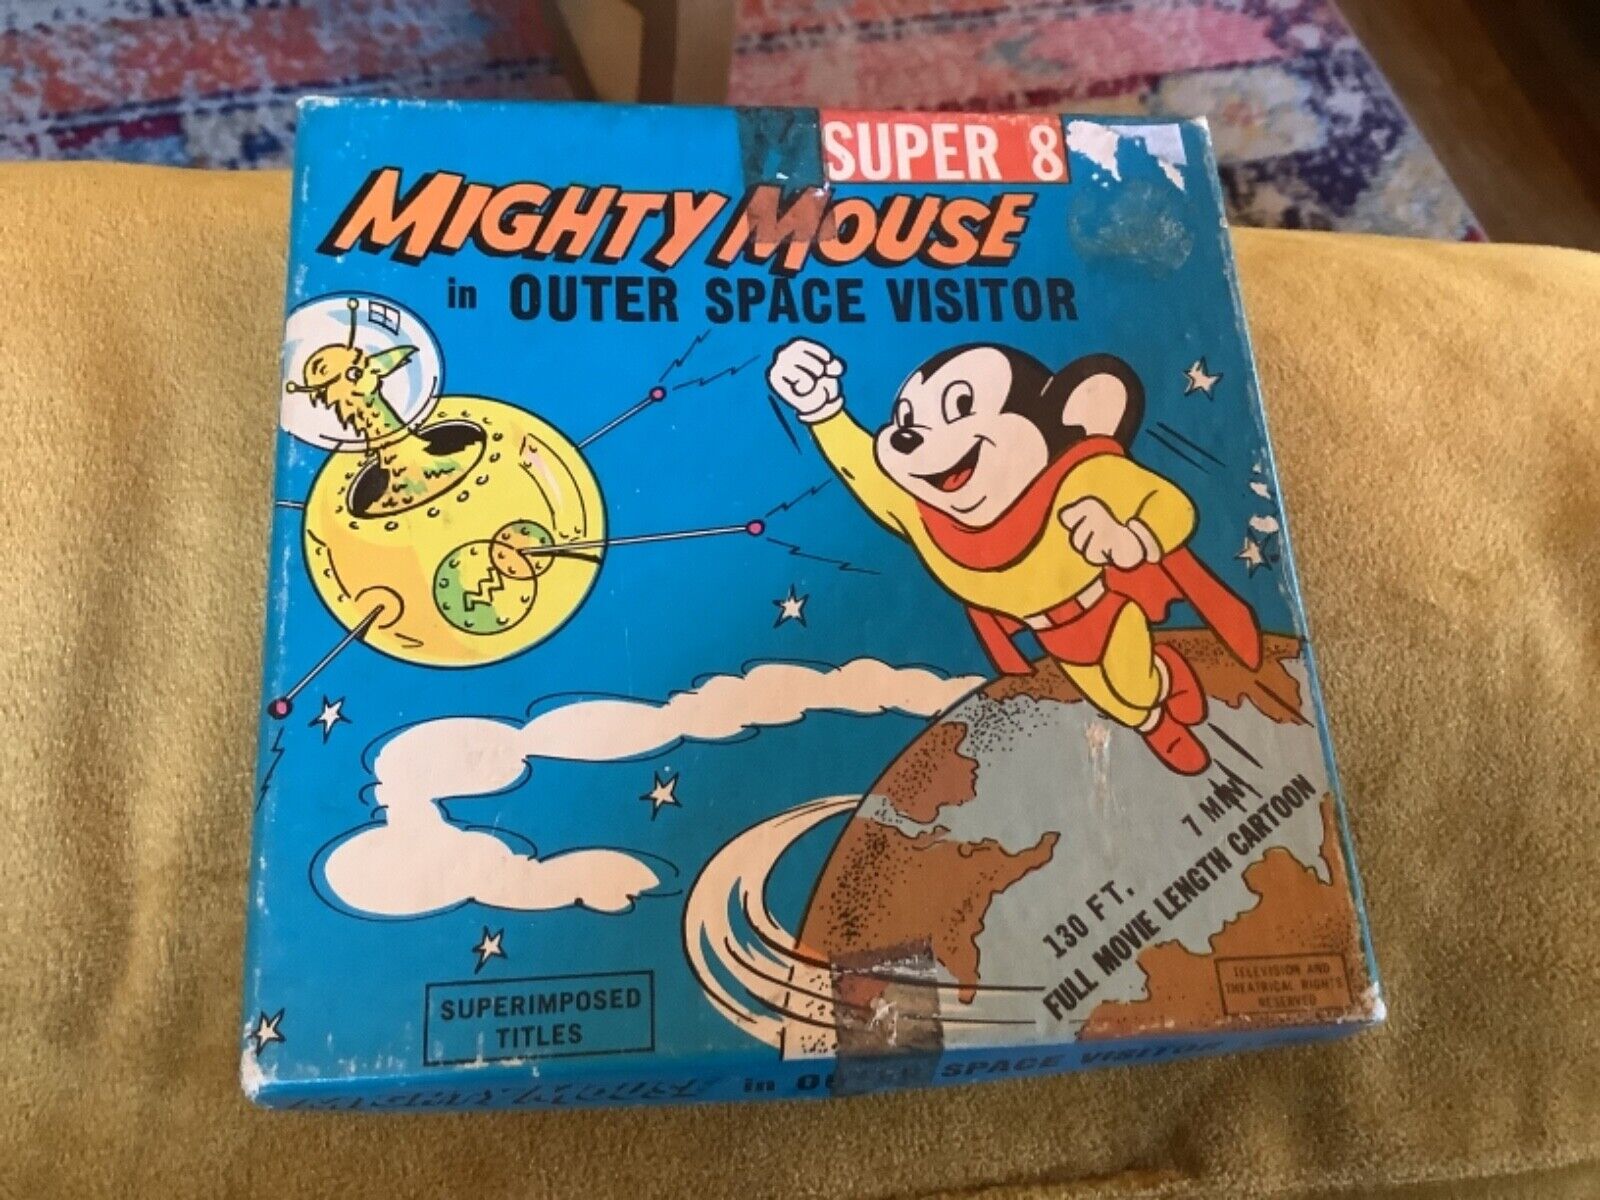 VINTAGE SUPER 8 FILM MIGHTY MOUSE OUTER SPACE VISITOR movie cartoon ken films